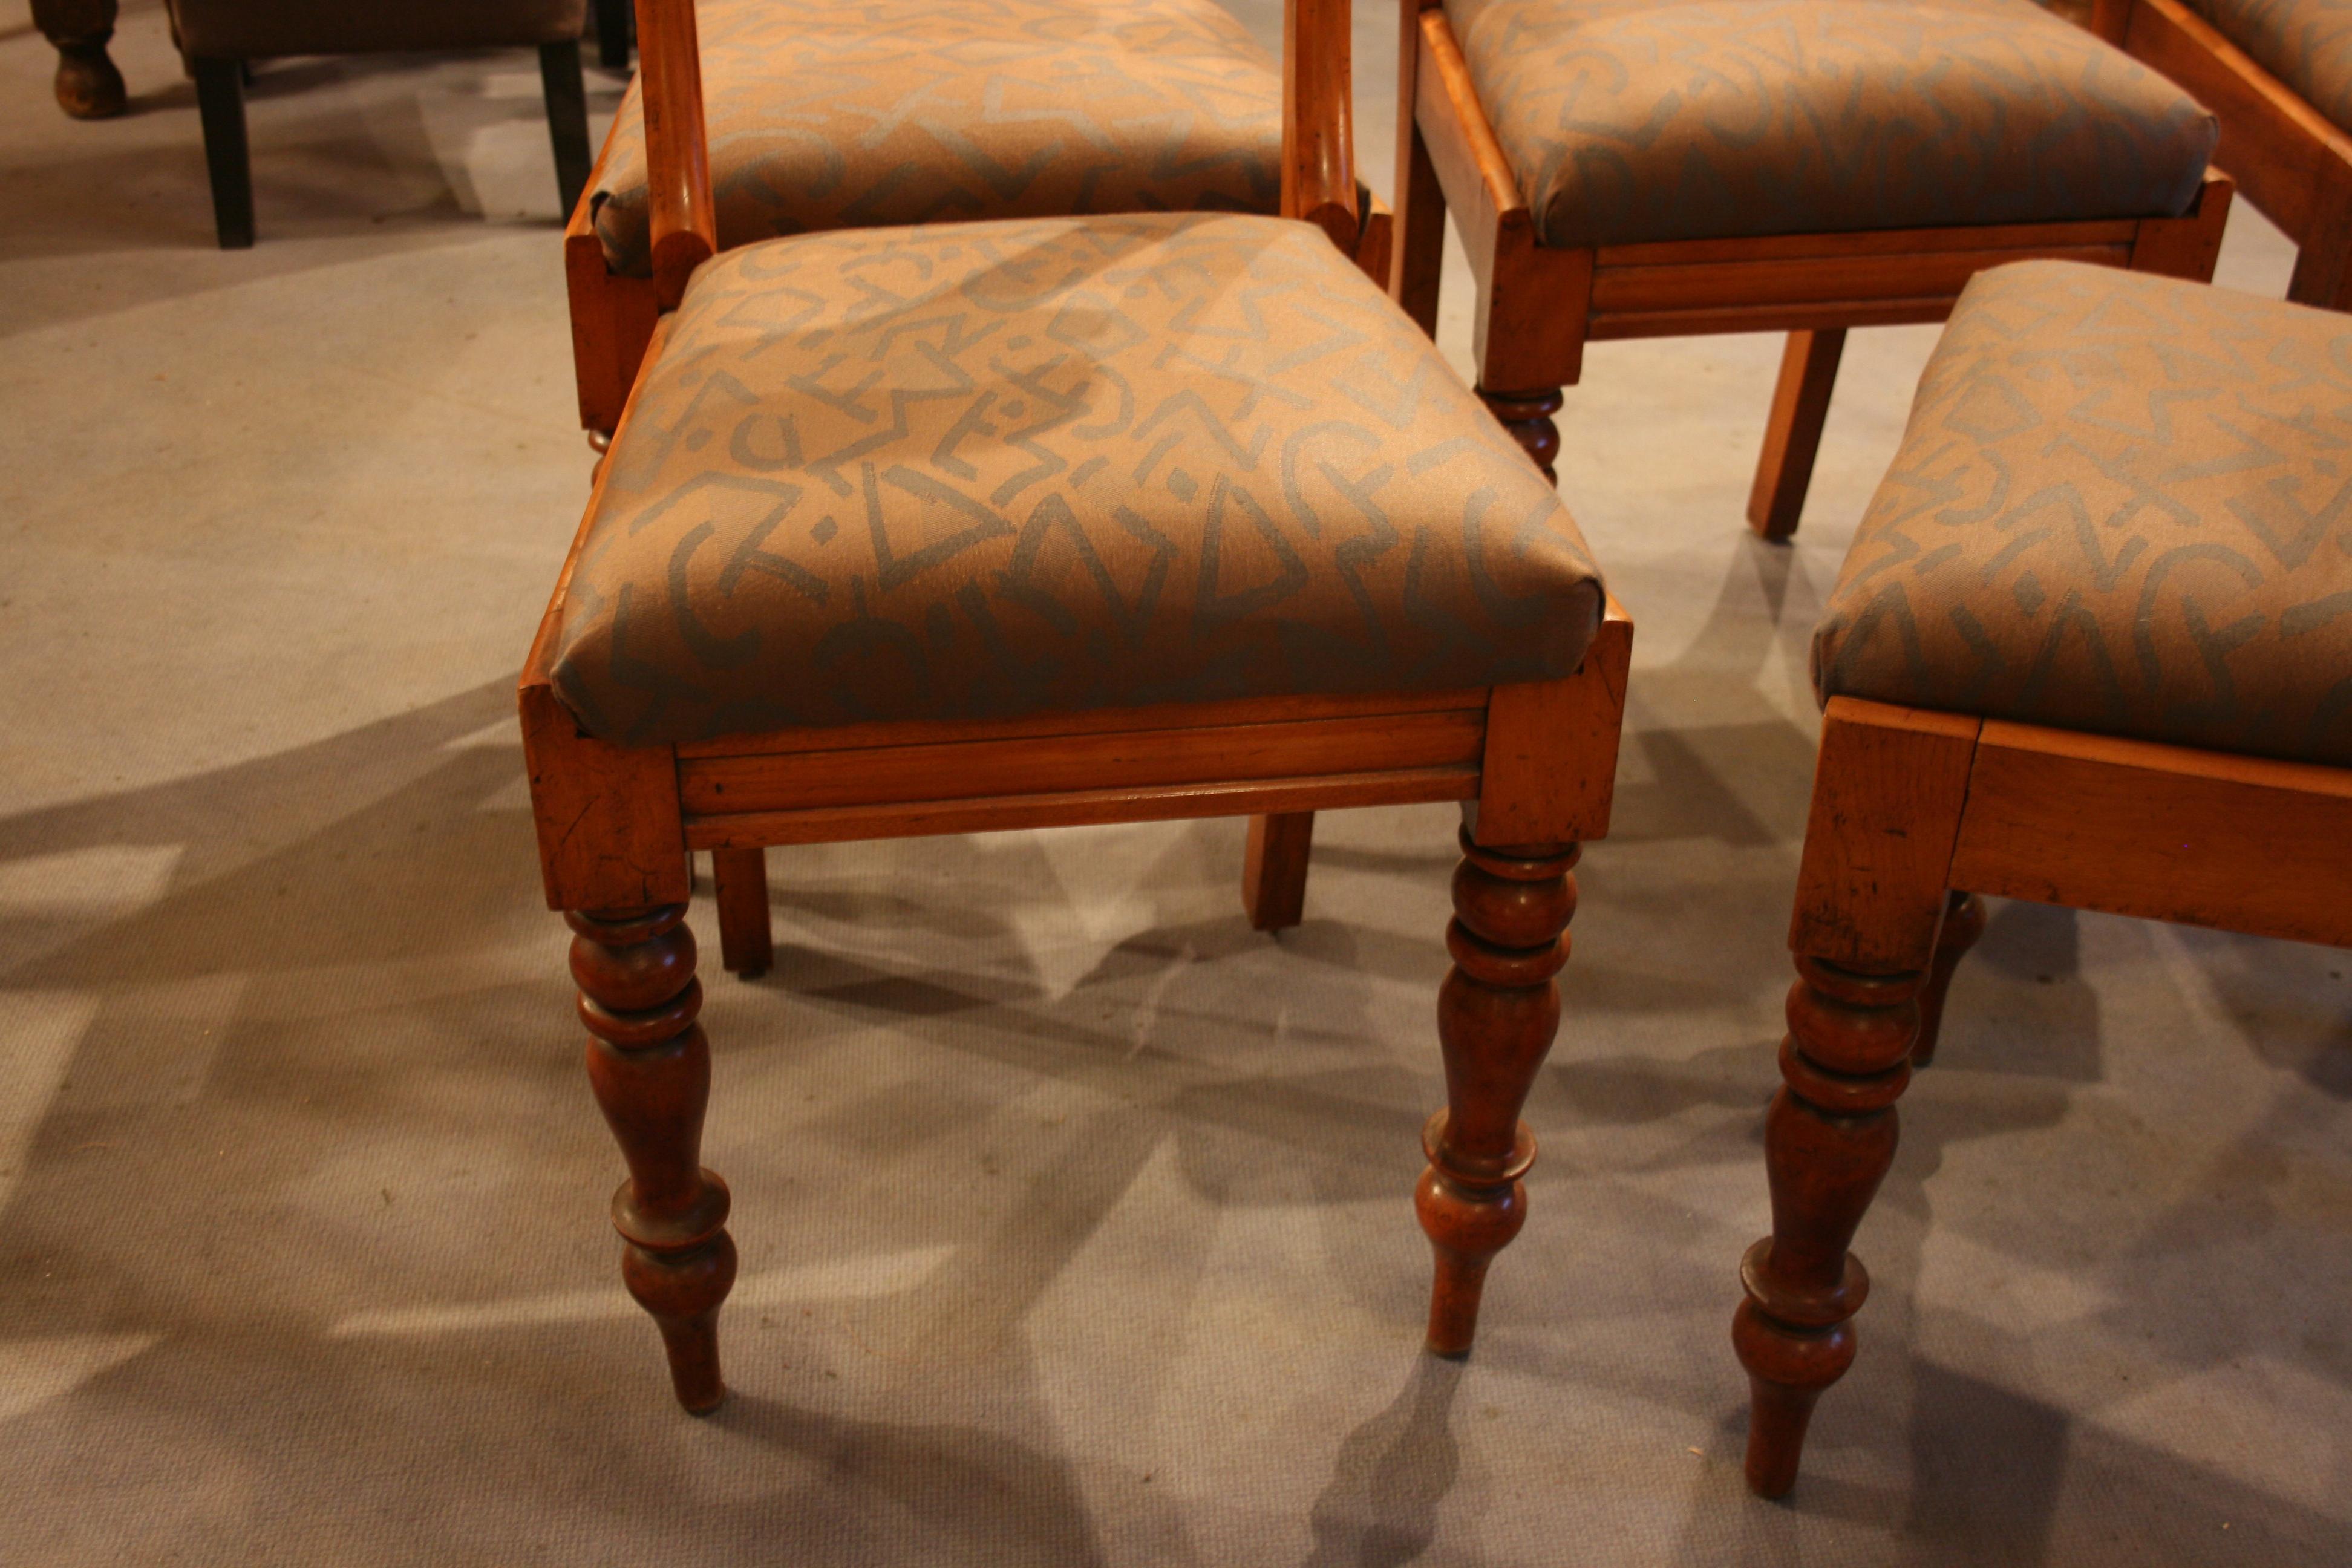 antique dining room chairs